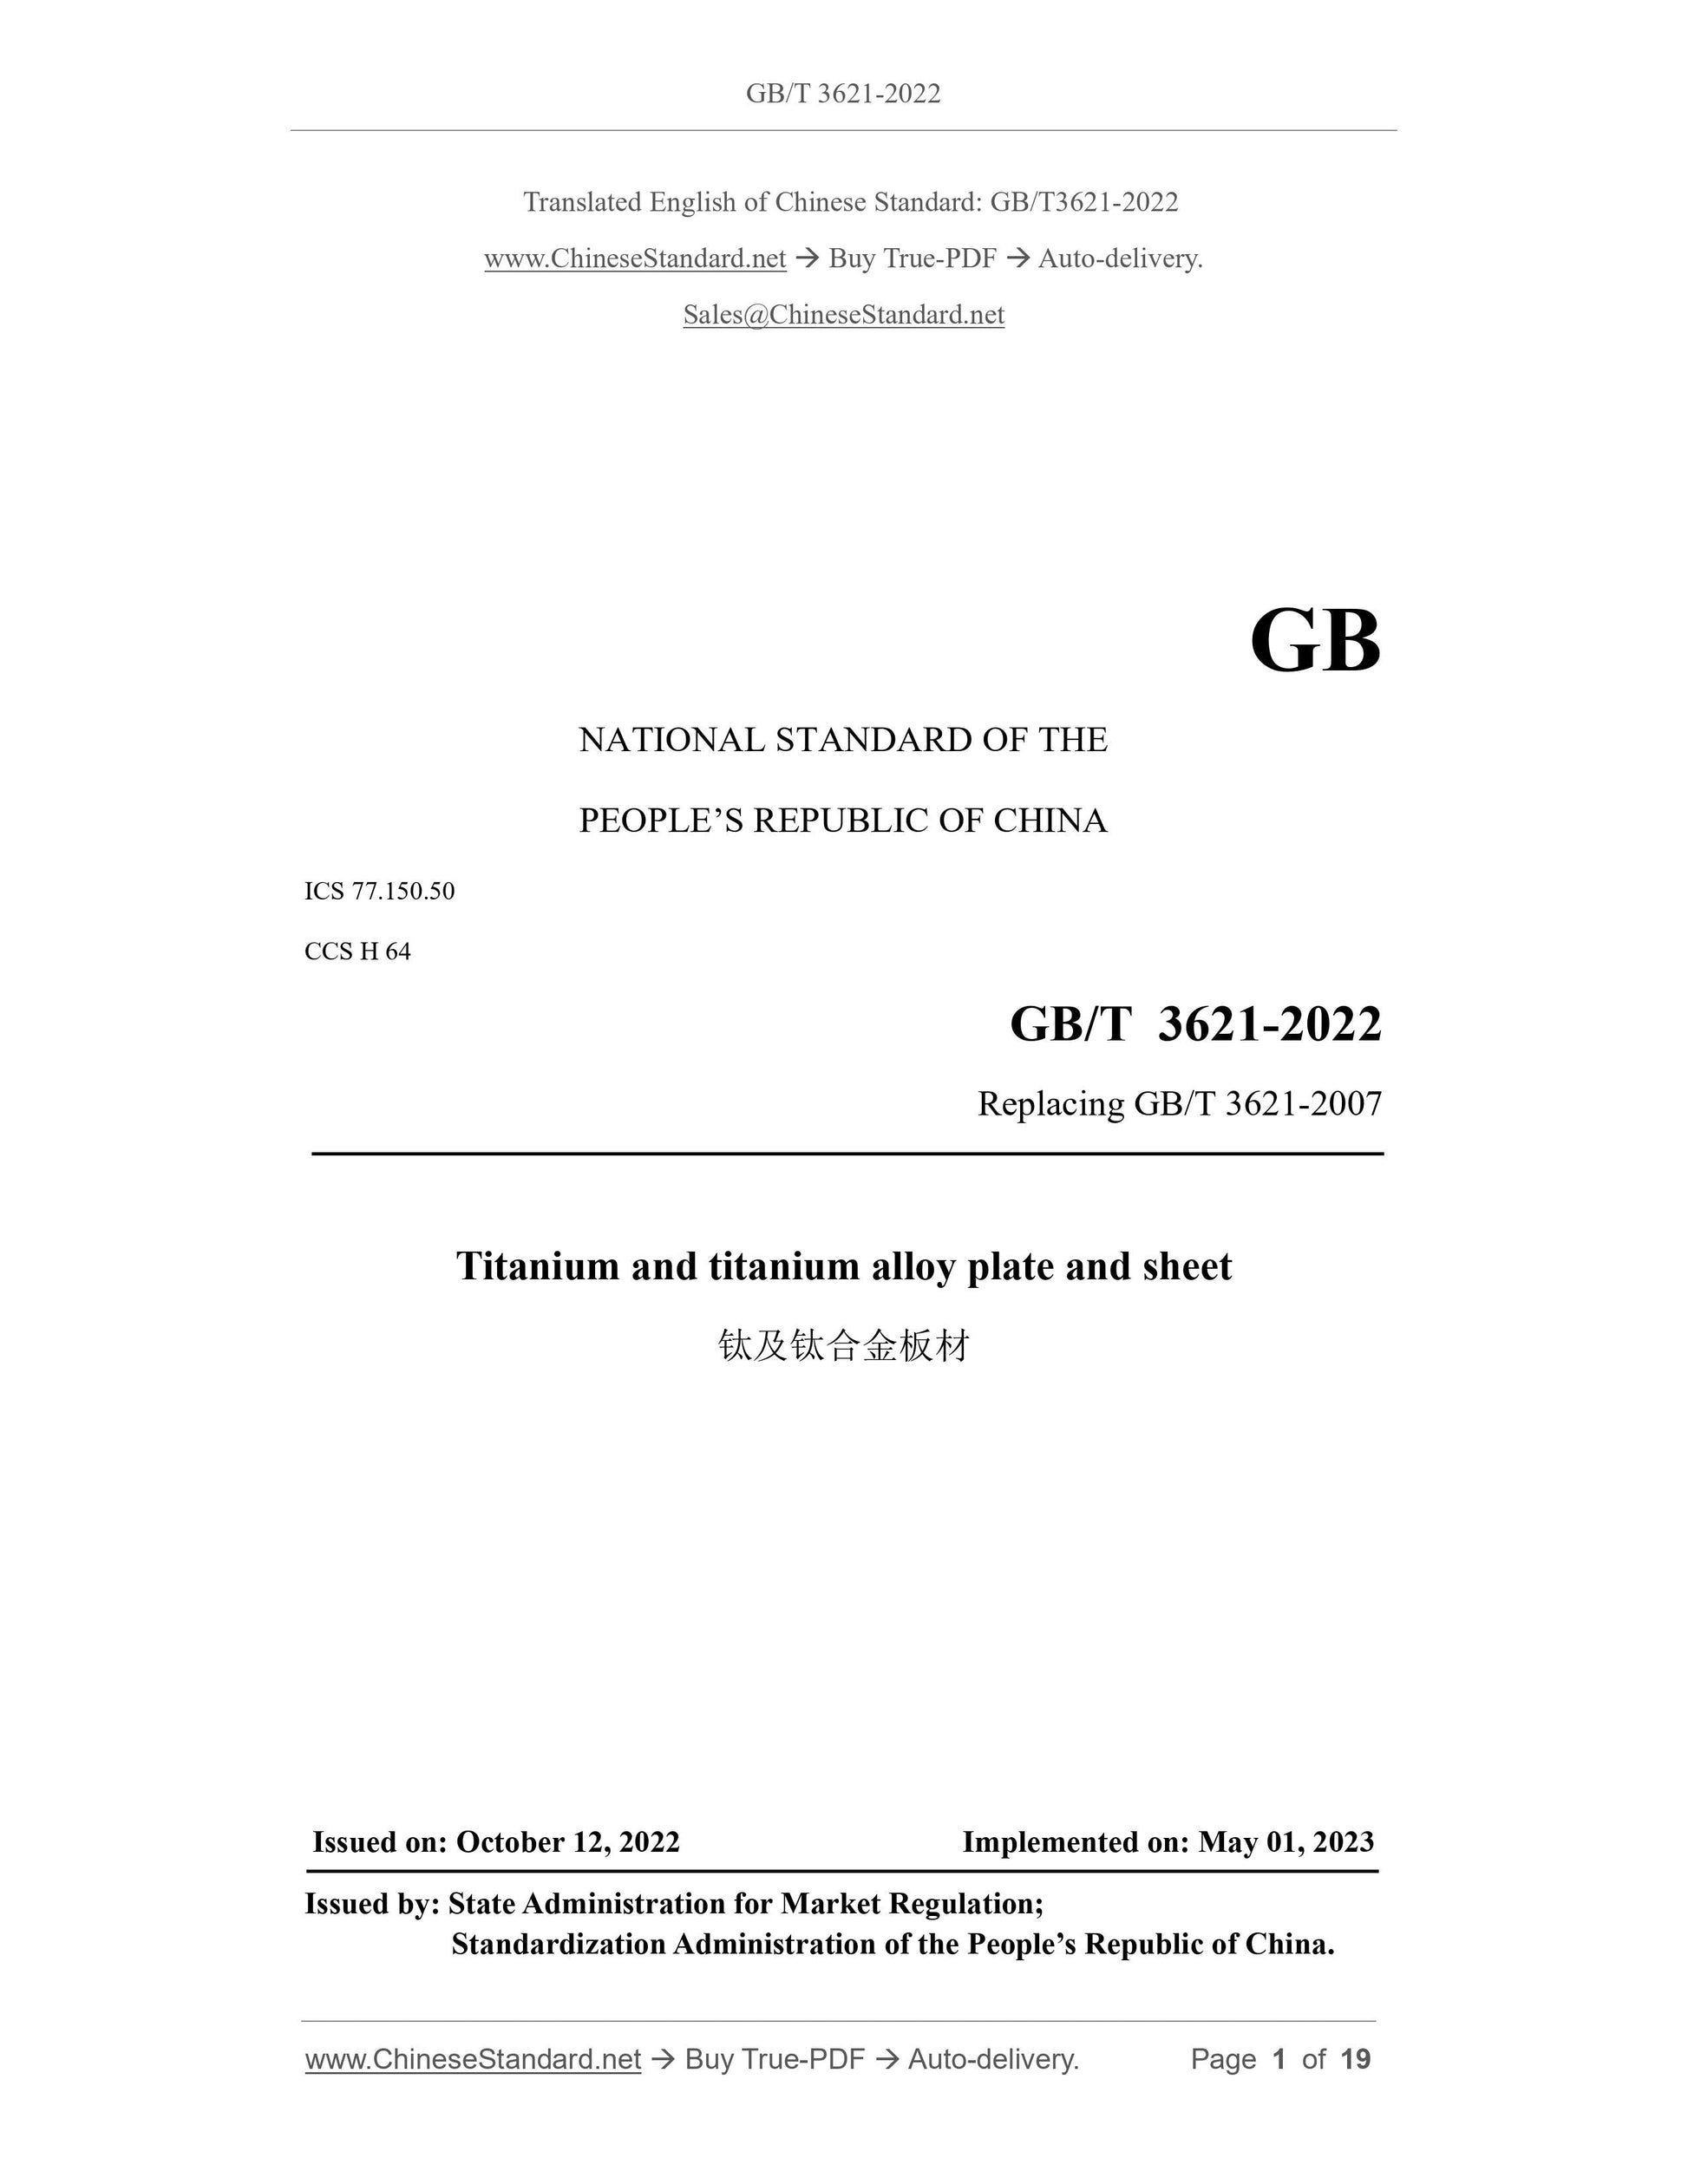 GB/T 3621-2022 Page 1